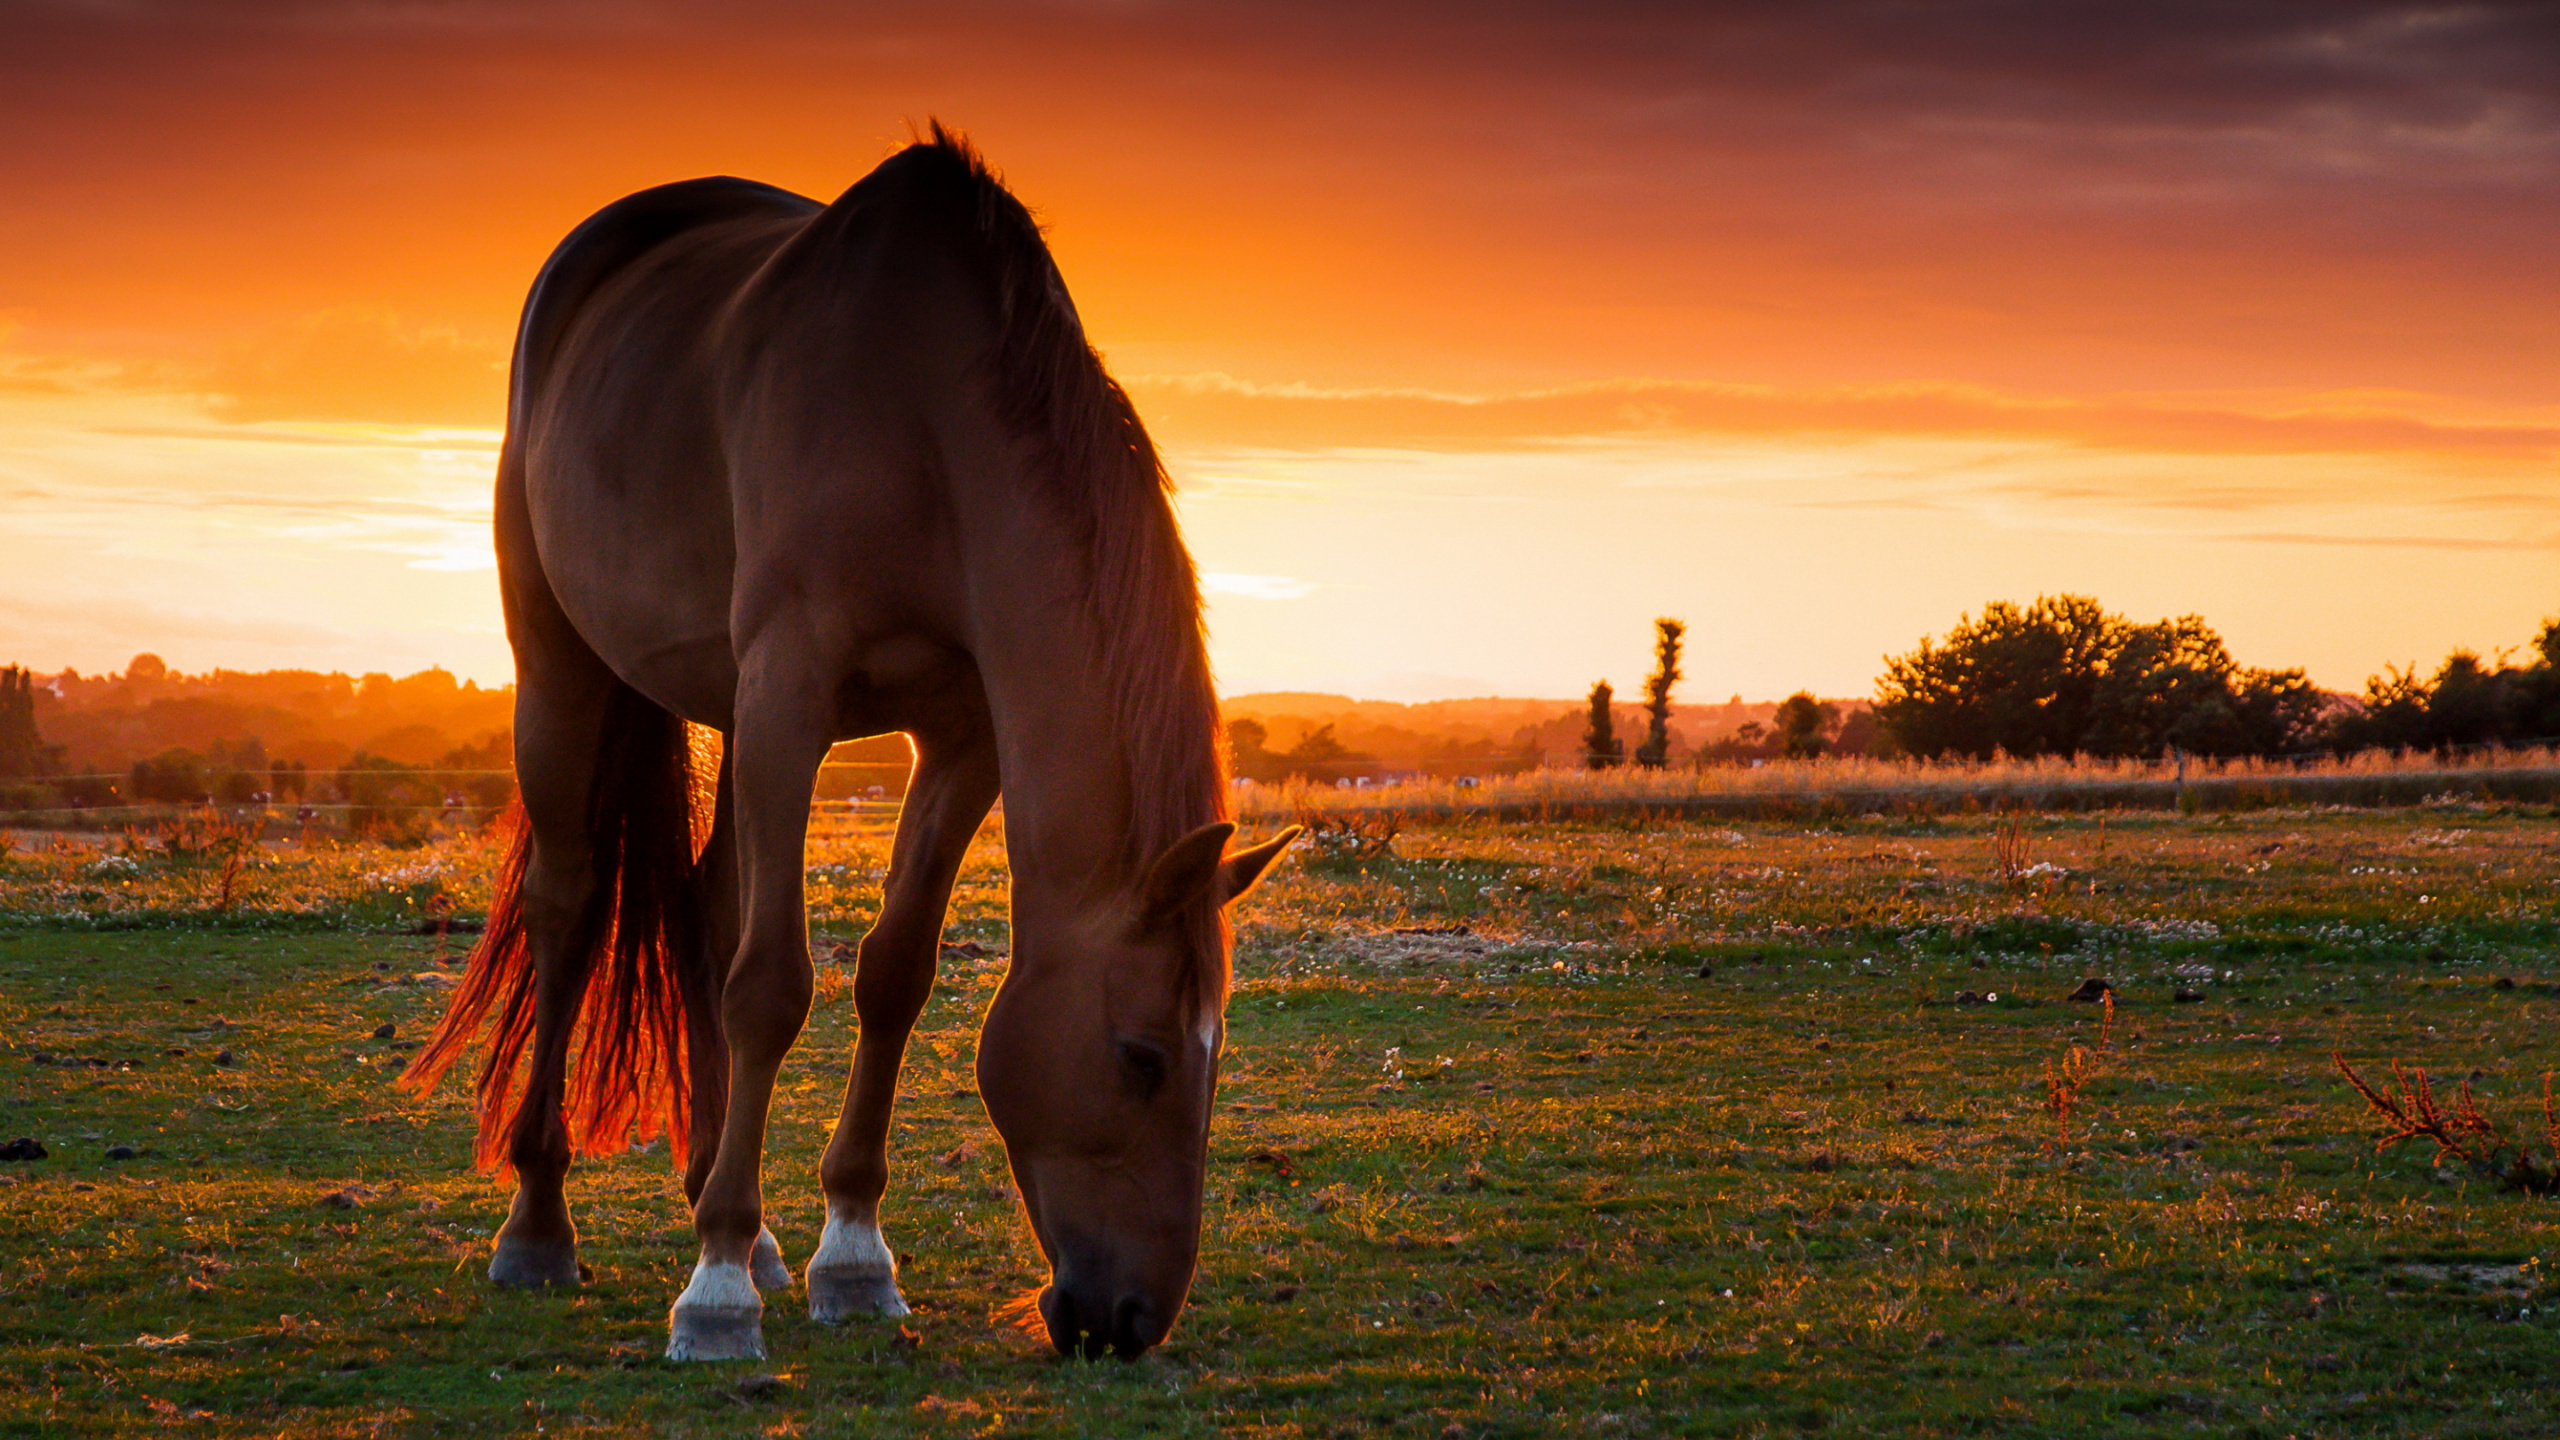 Brown Horse on Green Grass Field During Sunset. Wallpaper in 2560x1440 Resolution